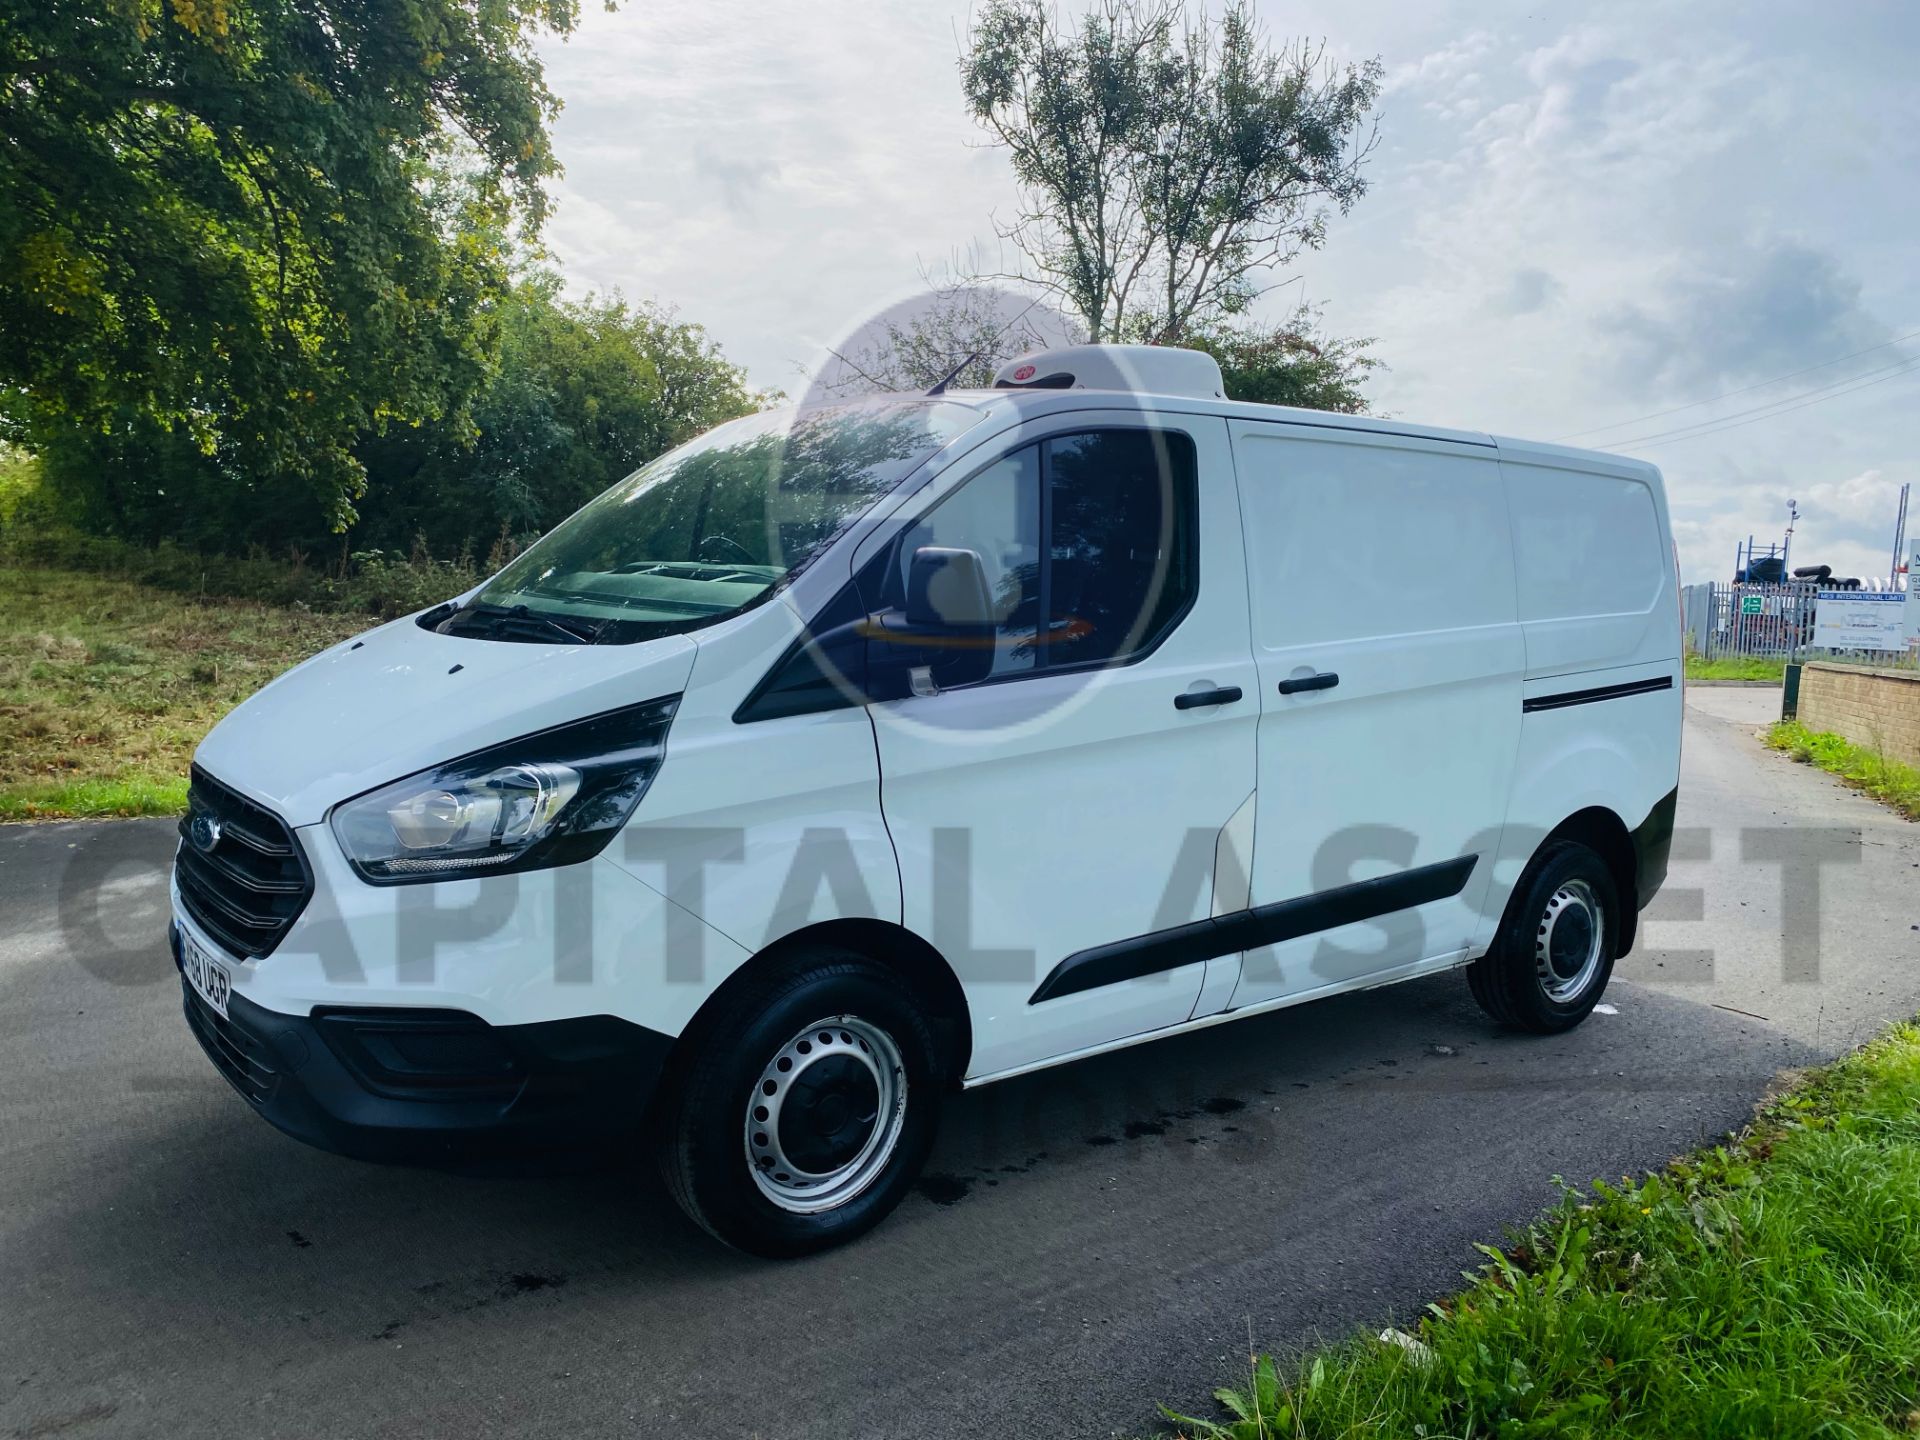 FORD TRANSIT CUSTOM *GAH REFRIGERATED VAN* (2019 - EURO 6) 2.0 TDCI - 6 SPEED (1 OWNER FROM NEW)